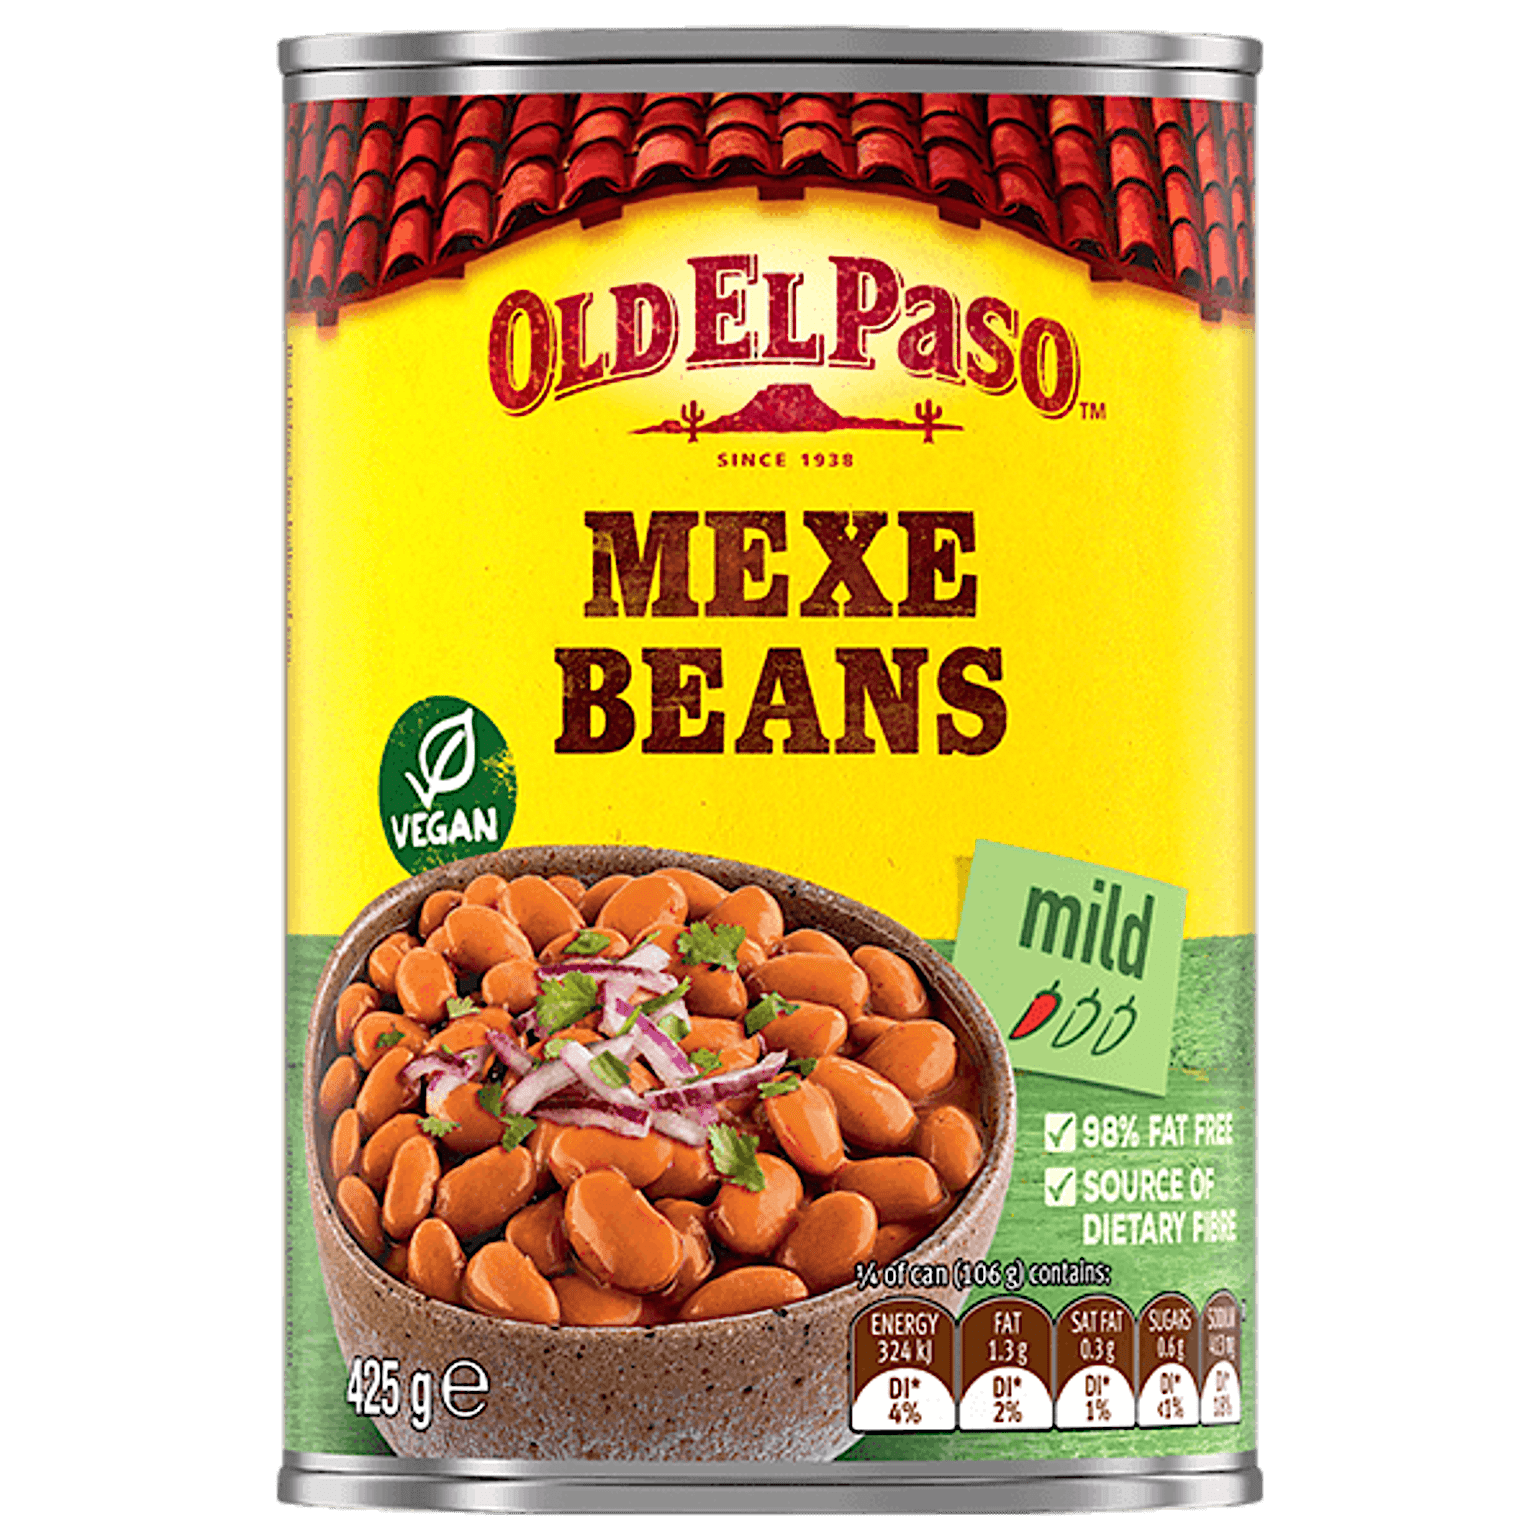 a can of Old El Paso's mild mexe beans (425g)